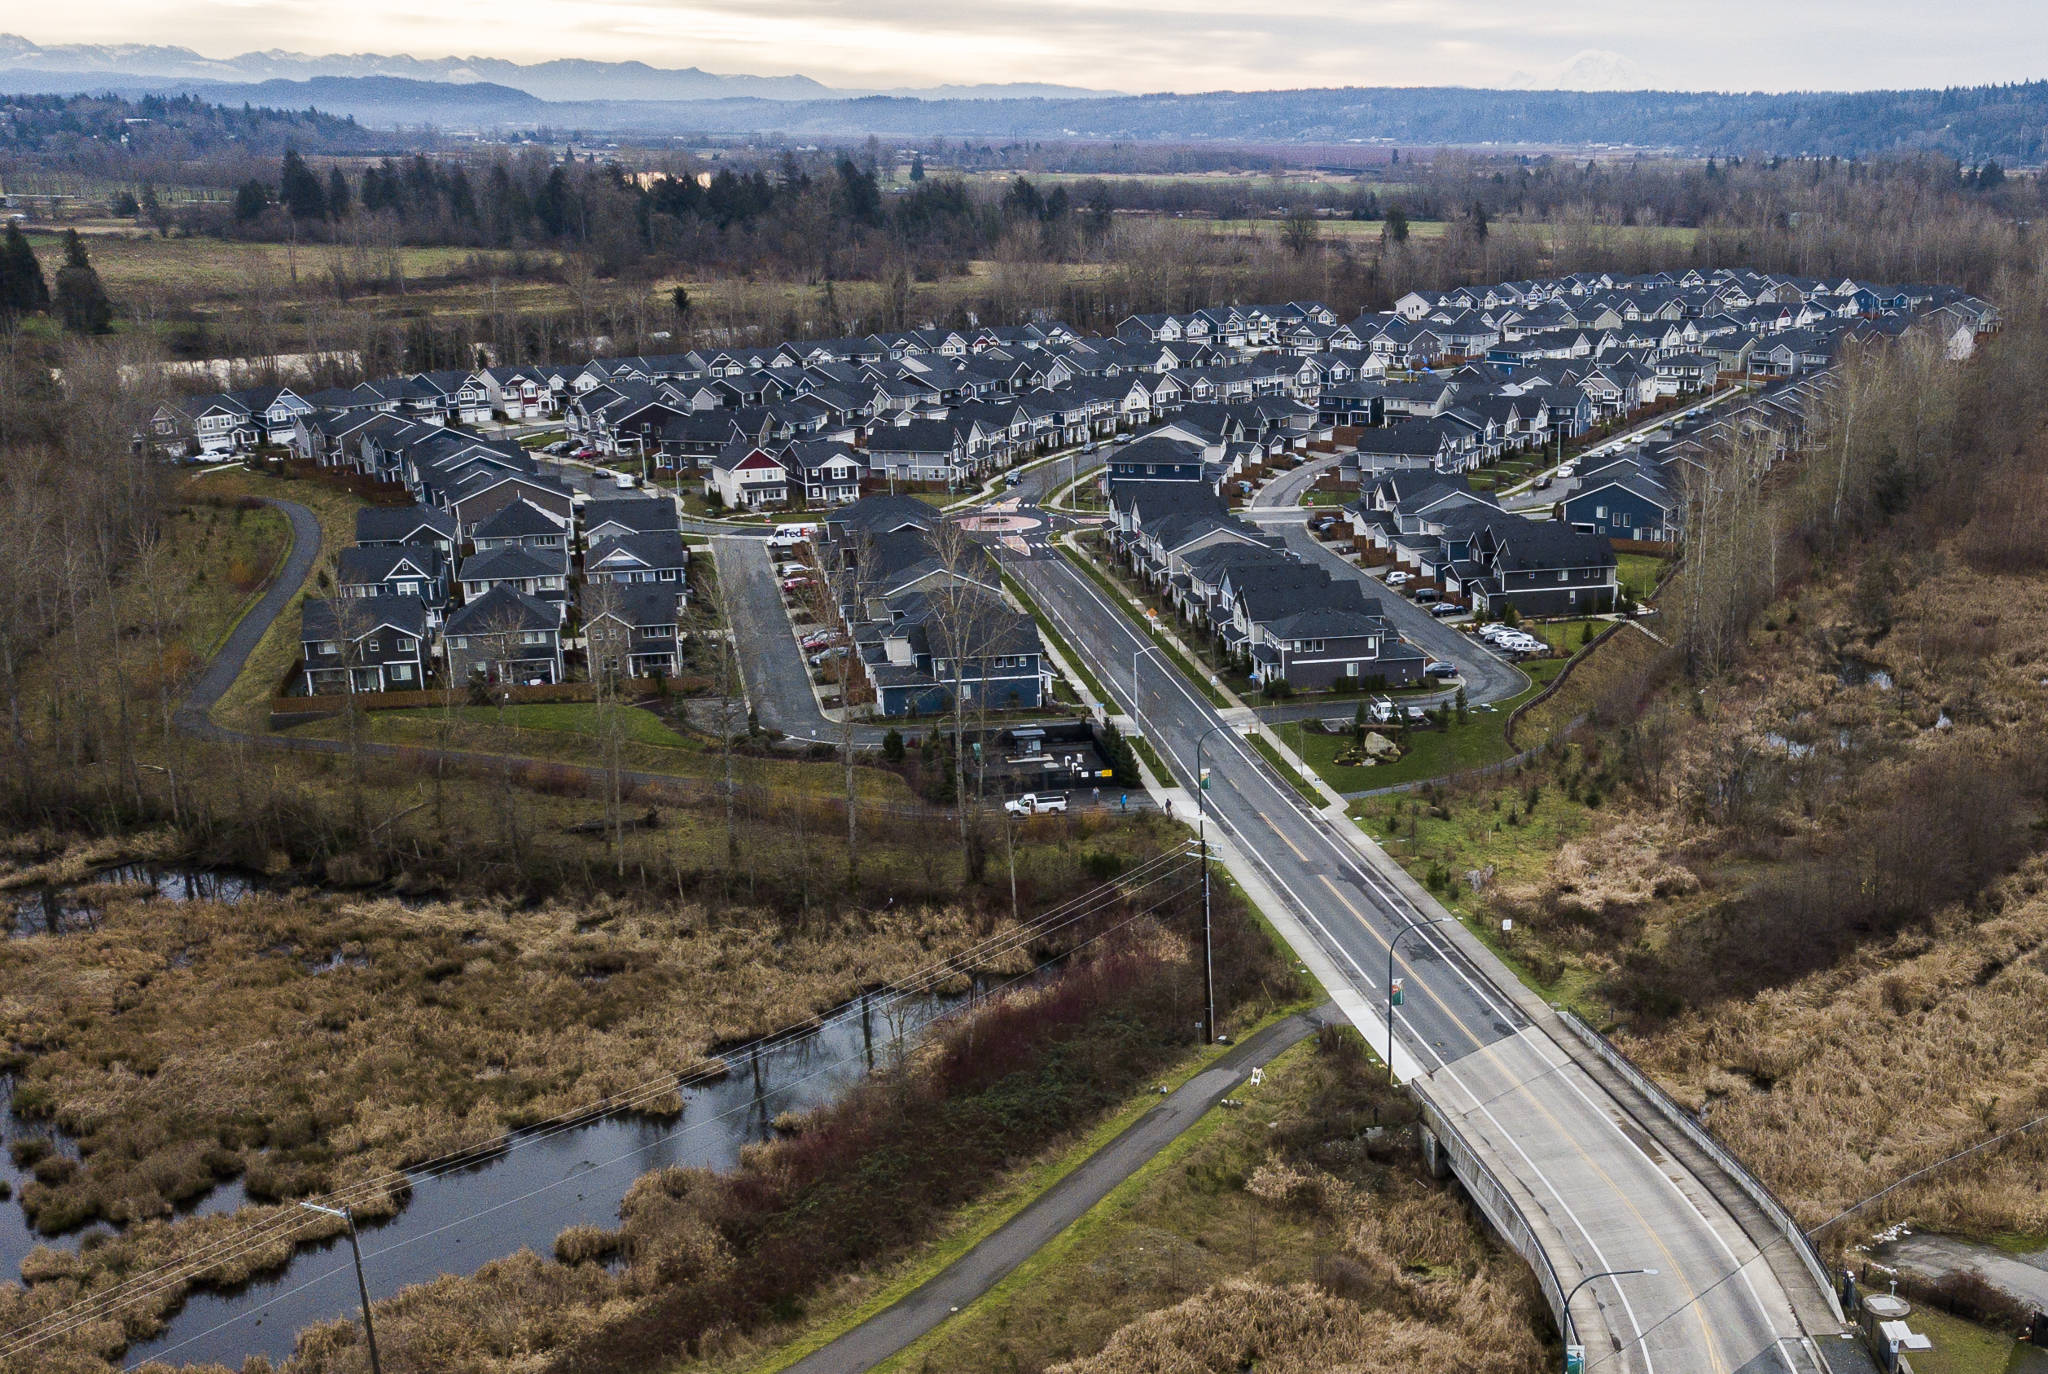 The Riverfront Development sits just south of the remains of the Everett landfill. New development will soon cover nearly all the 70-acre former landfill. (Olivia Vanni / The Herald)